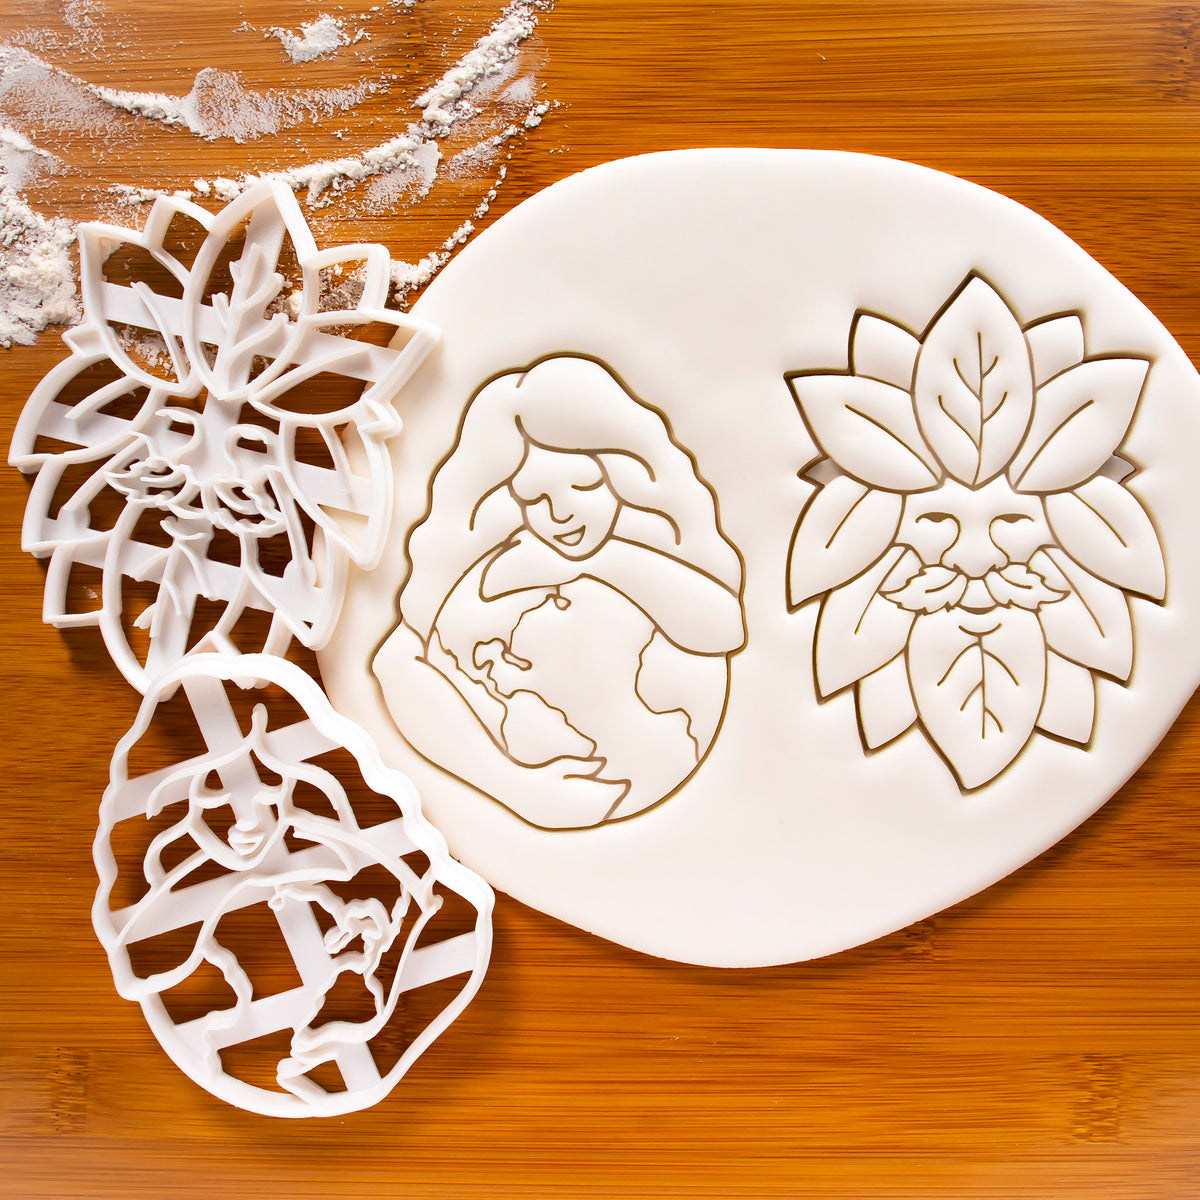 Set of 2 cookie cutters - Gaia Earth Goddess and Green man